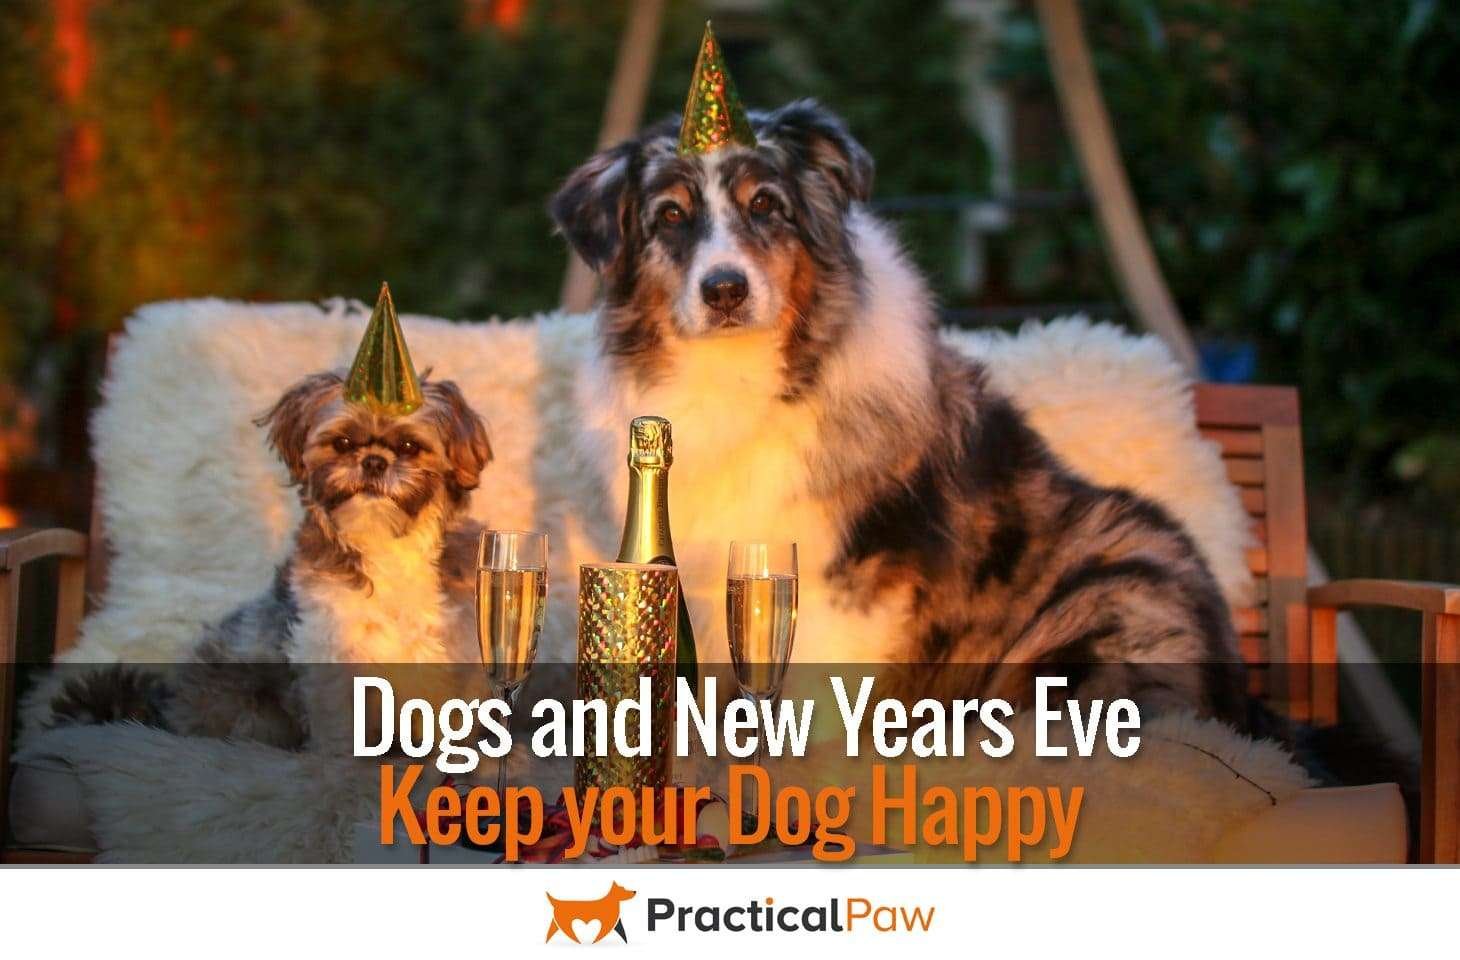 Dogs and New Years Eve - Keep your Dog Happy